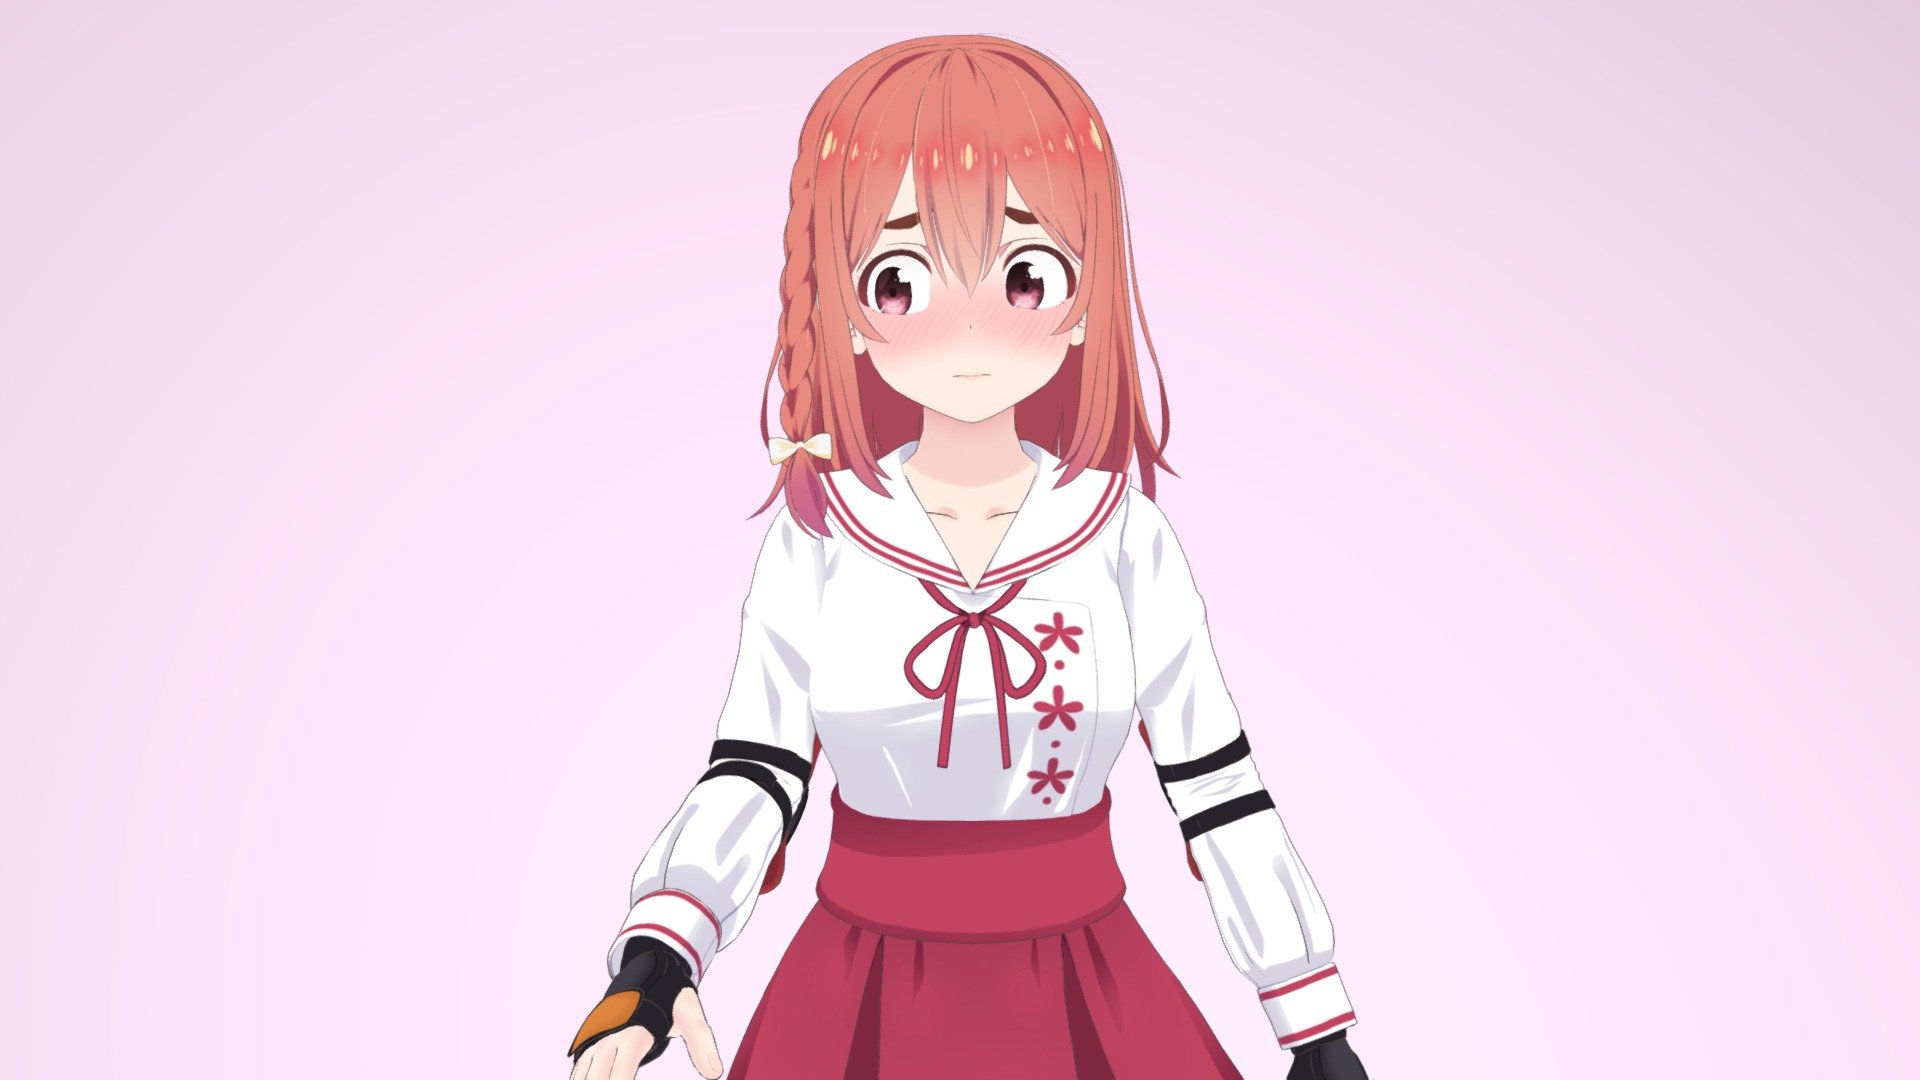 I made Sakurasawa Sumi from the anime “Rent A Girlfriend” with Blender.

Making video:https://youtu.be/_reWruQiV7k - Rent A Girlfriend - Sakurasawa Sumi - 3D model by vanilla_coffee_ice (@baniracoffee) 3d model